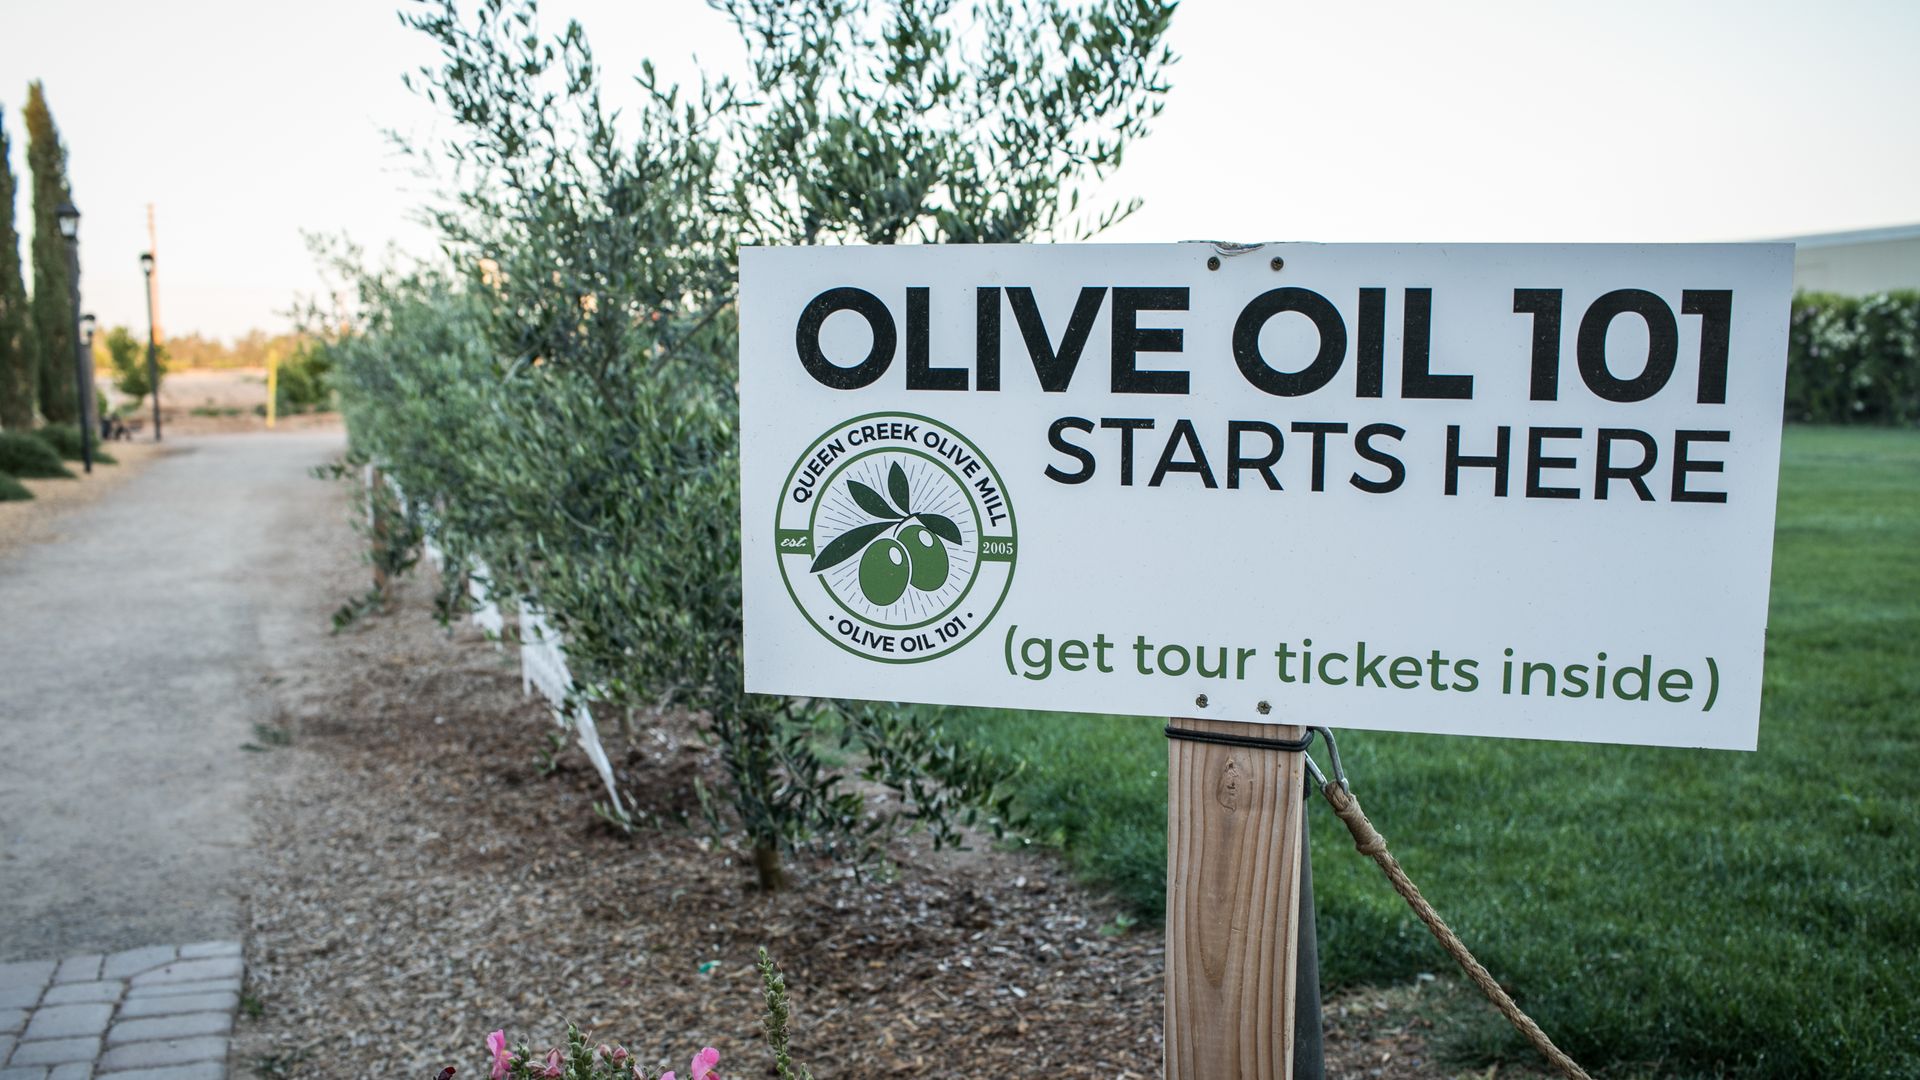 A sign that says, "OLIVE OIL 101 STARTS HERE."